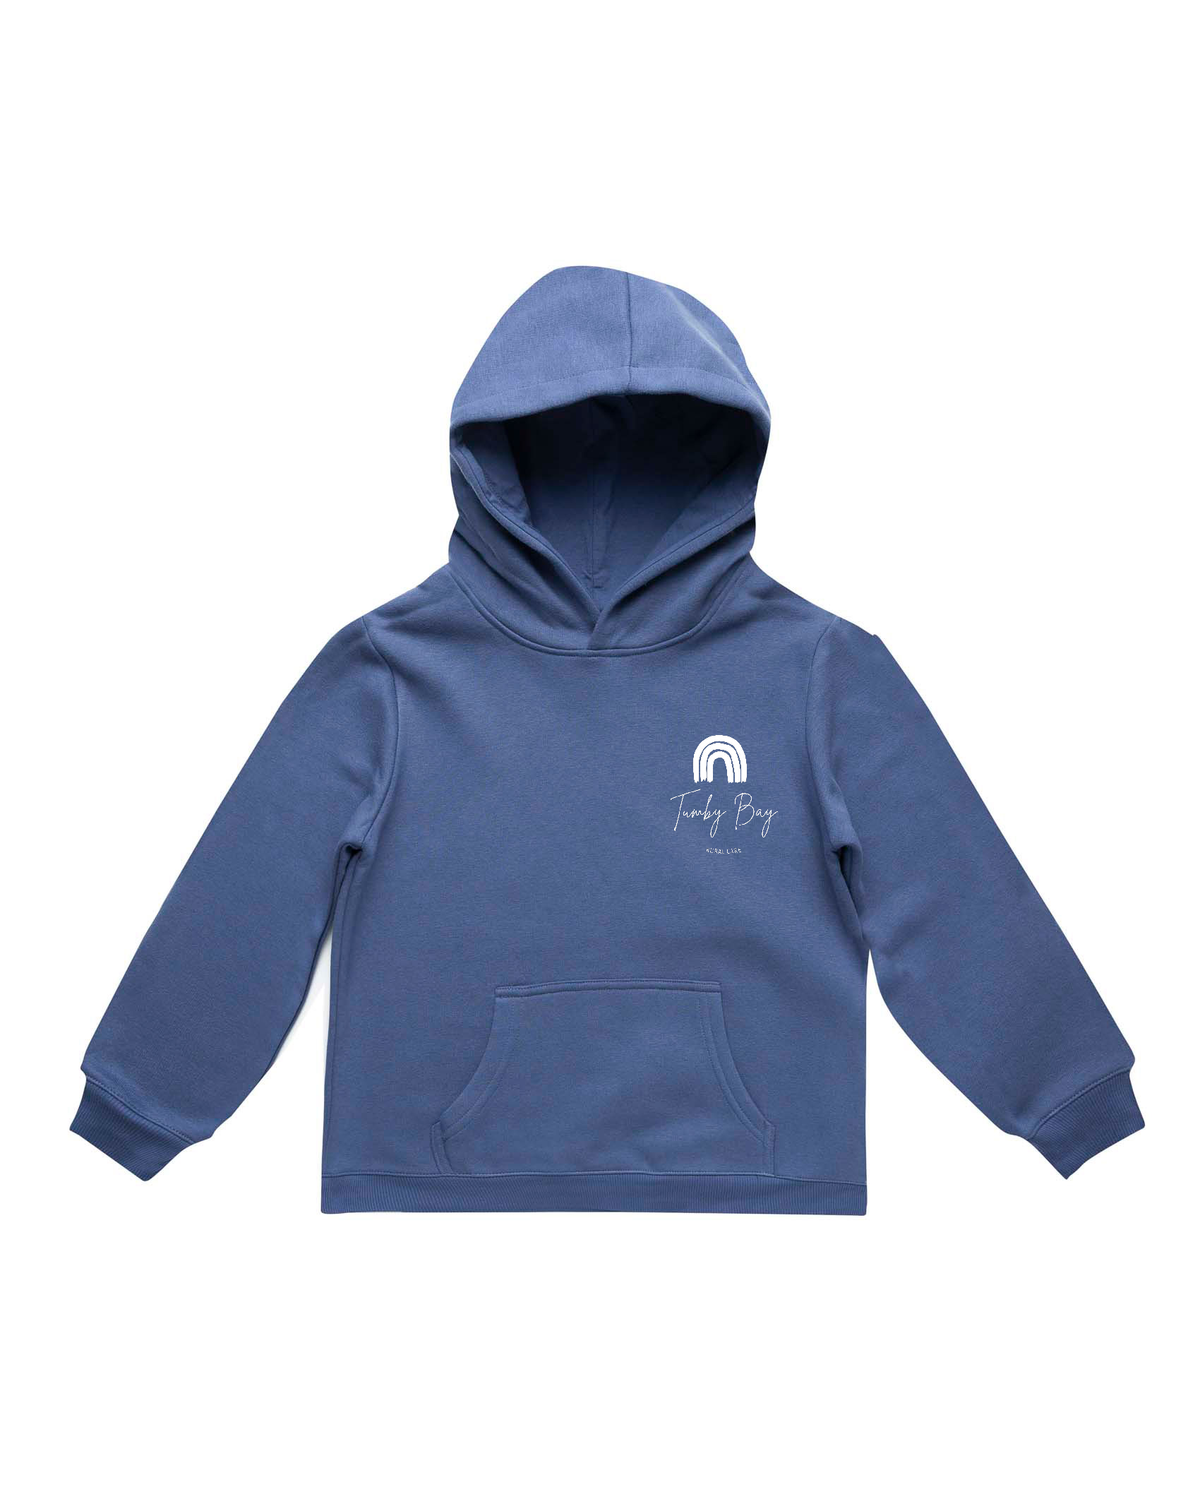 Tumby Bay Rural Care Hoodie Cotton Blend